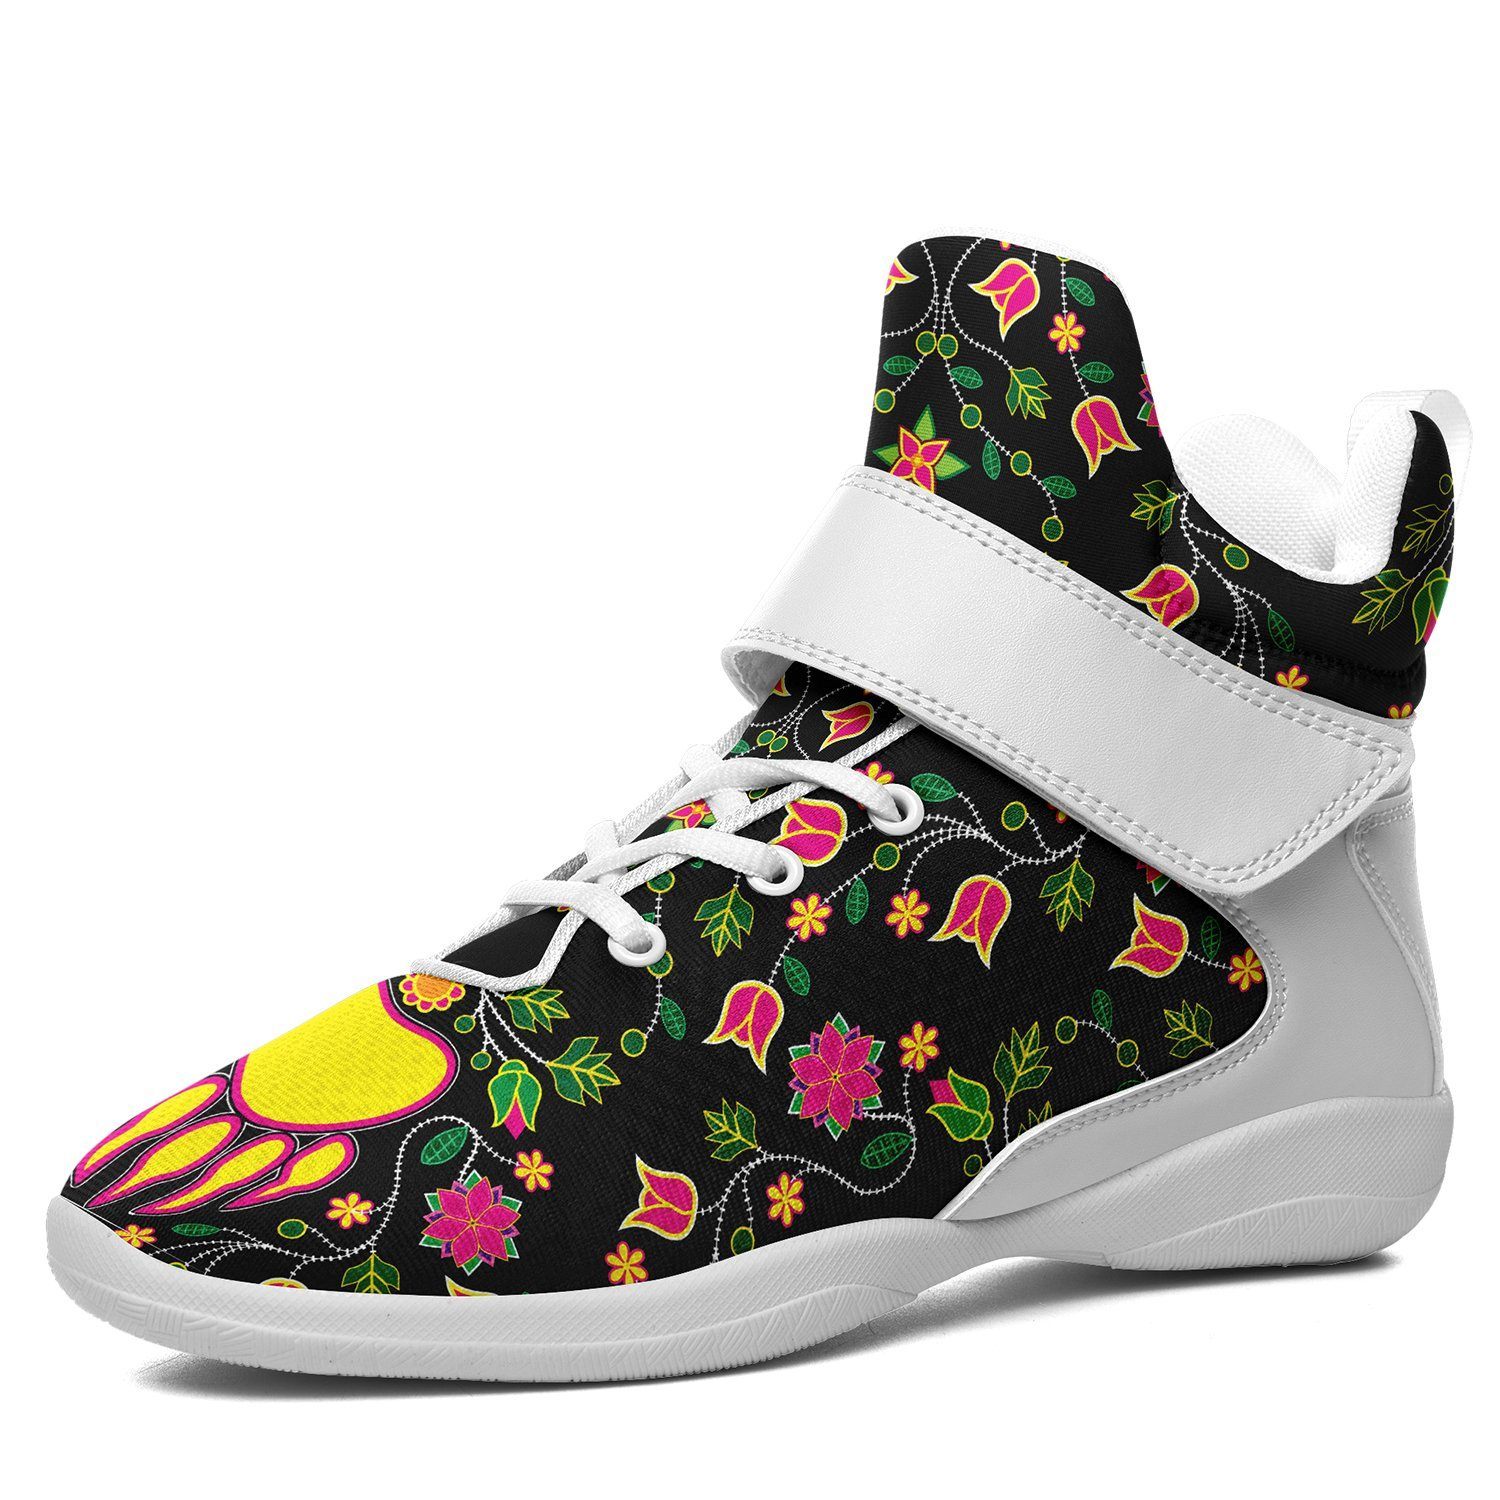 Floral Bearpaw Ipottaa Basketball / Sport High Top Shoes - White Sole 49 Dzine US Women 8.5 / US Men 7 / EUR 40 White Sole with White Strap 